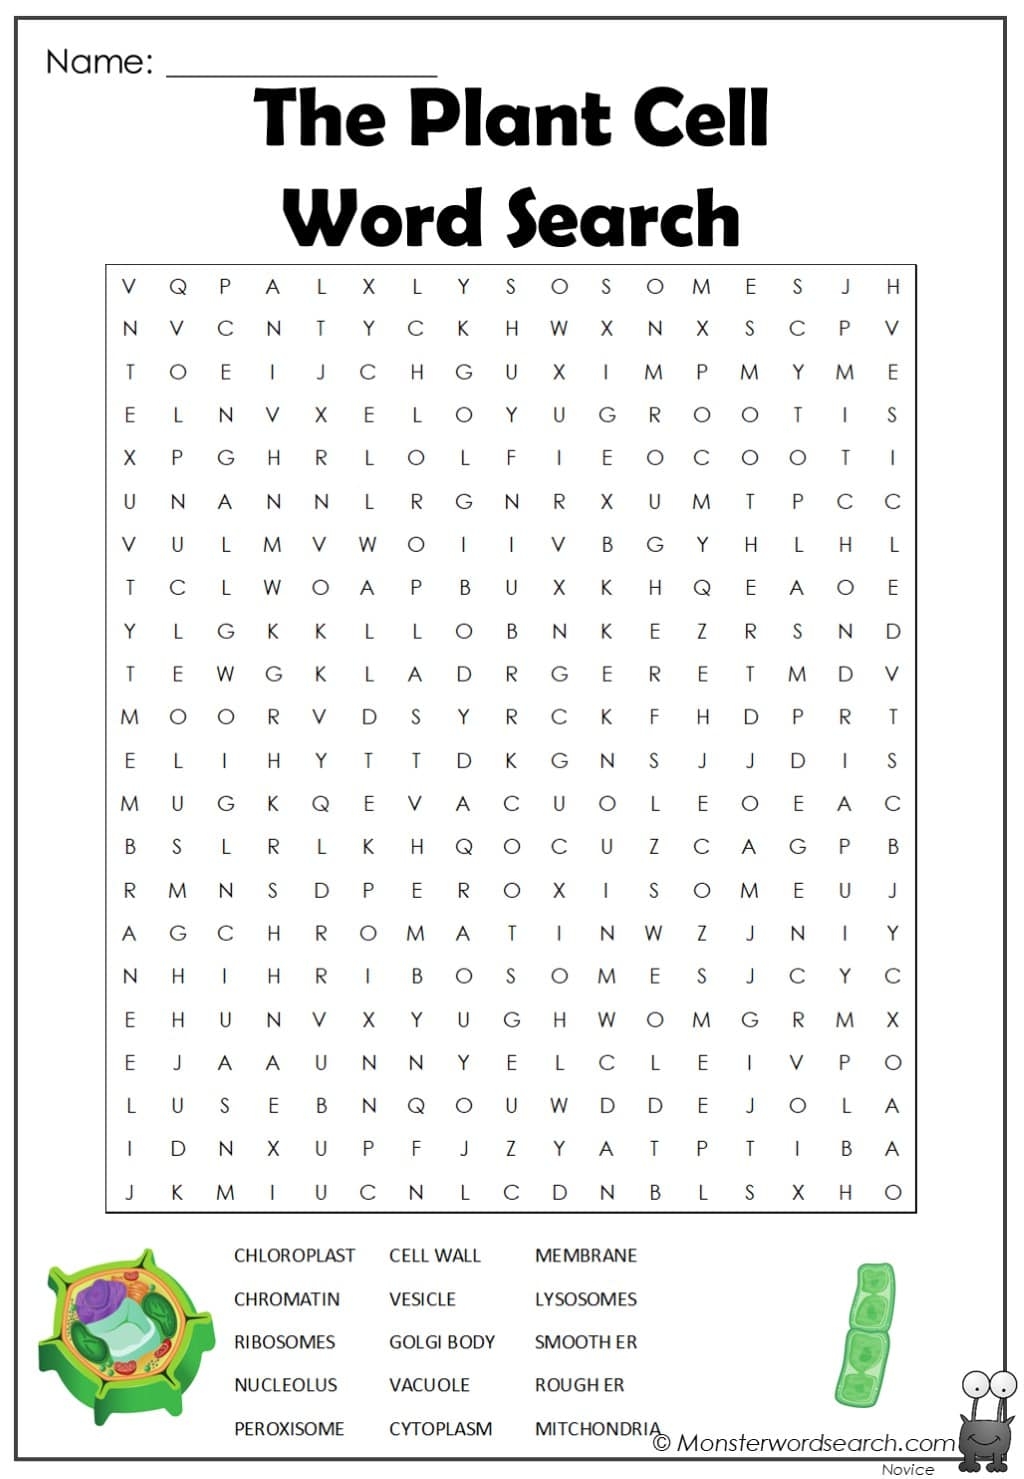 The Plant Cell Word Search Monster Word Search